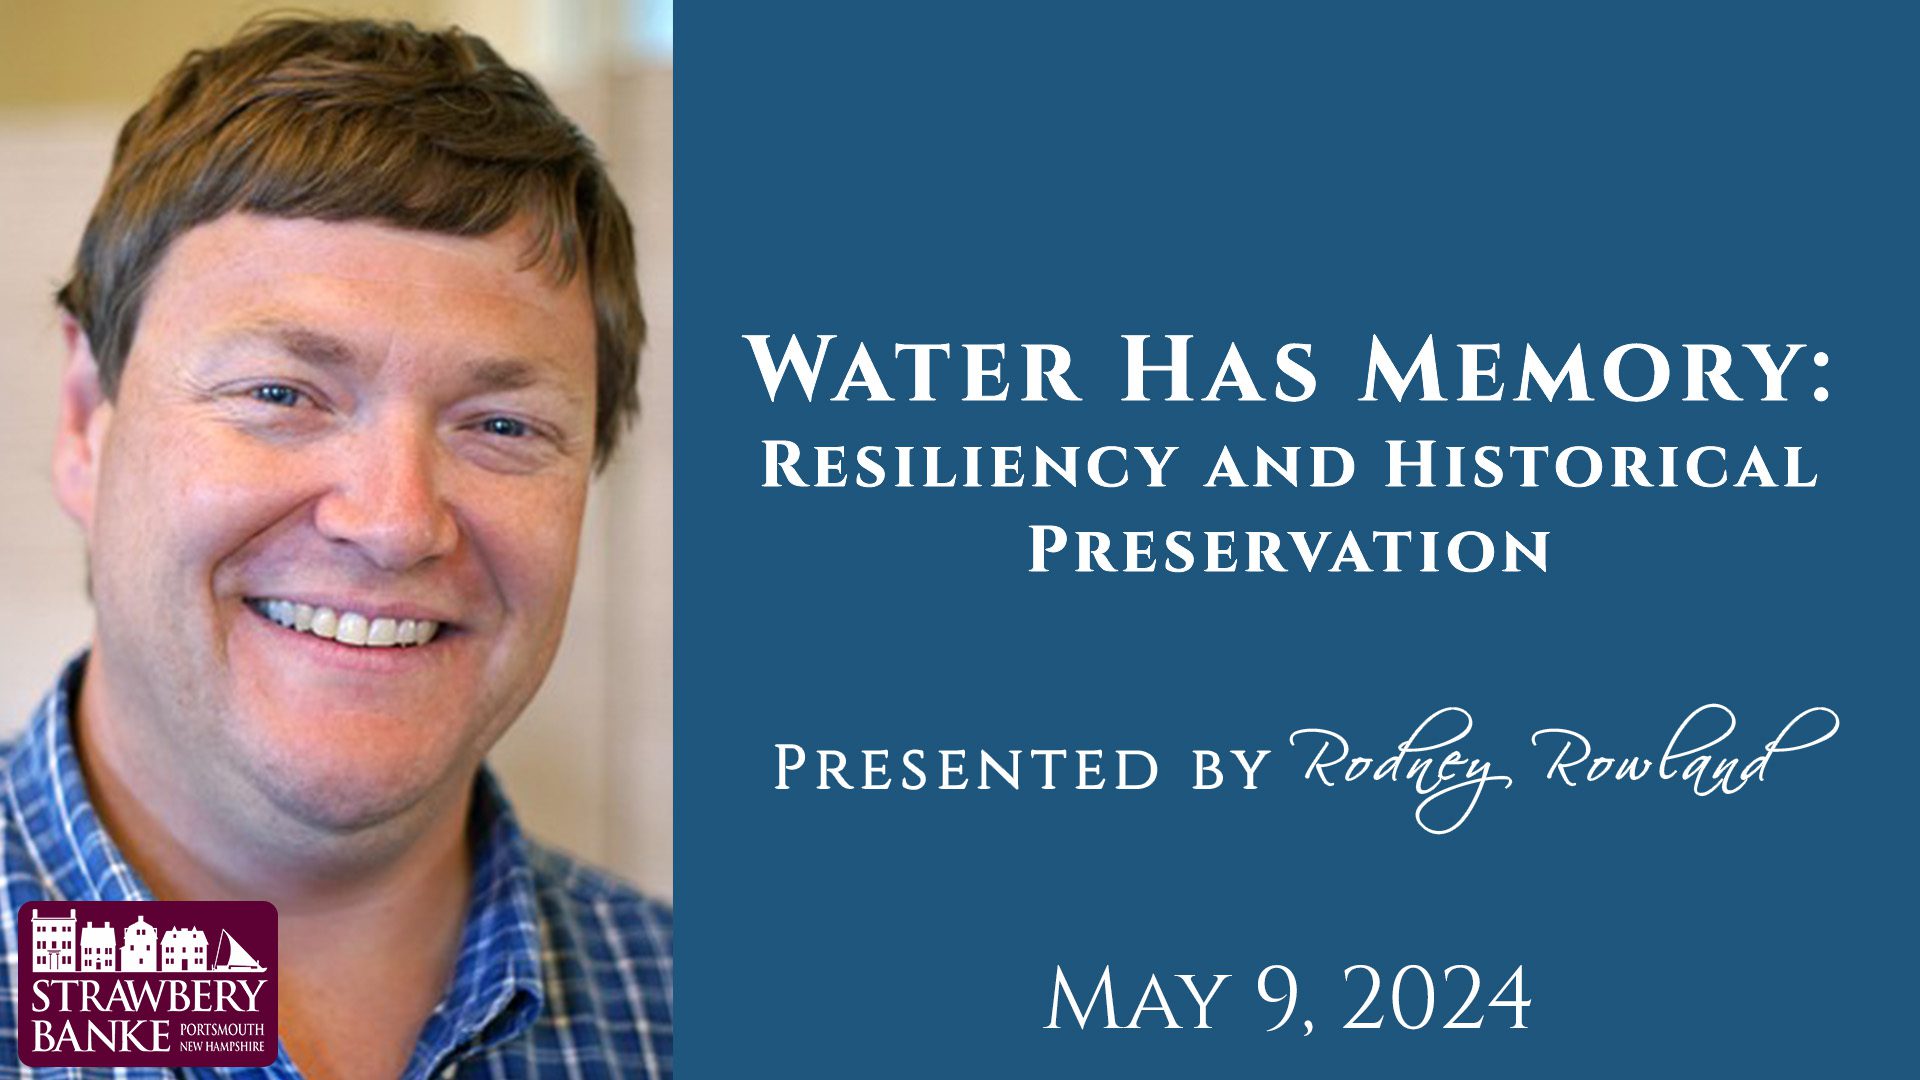 Mark your calendars for May 9, 2024! Join us for an interesting presentation by Rodney Rowland at the Strawberry Banke Museum. His talk, 'Water Has Memory: Resiliency and Historical Preservation', promises to be thought-provoking and enlightening. Don't miss it!